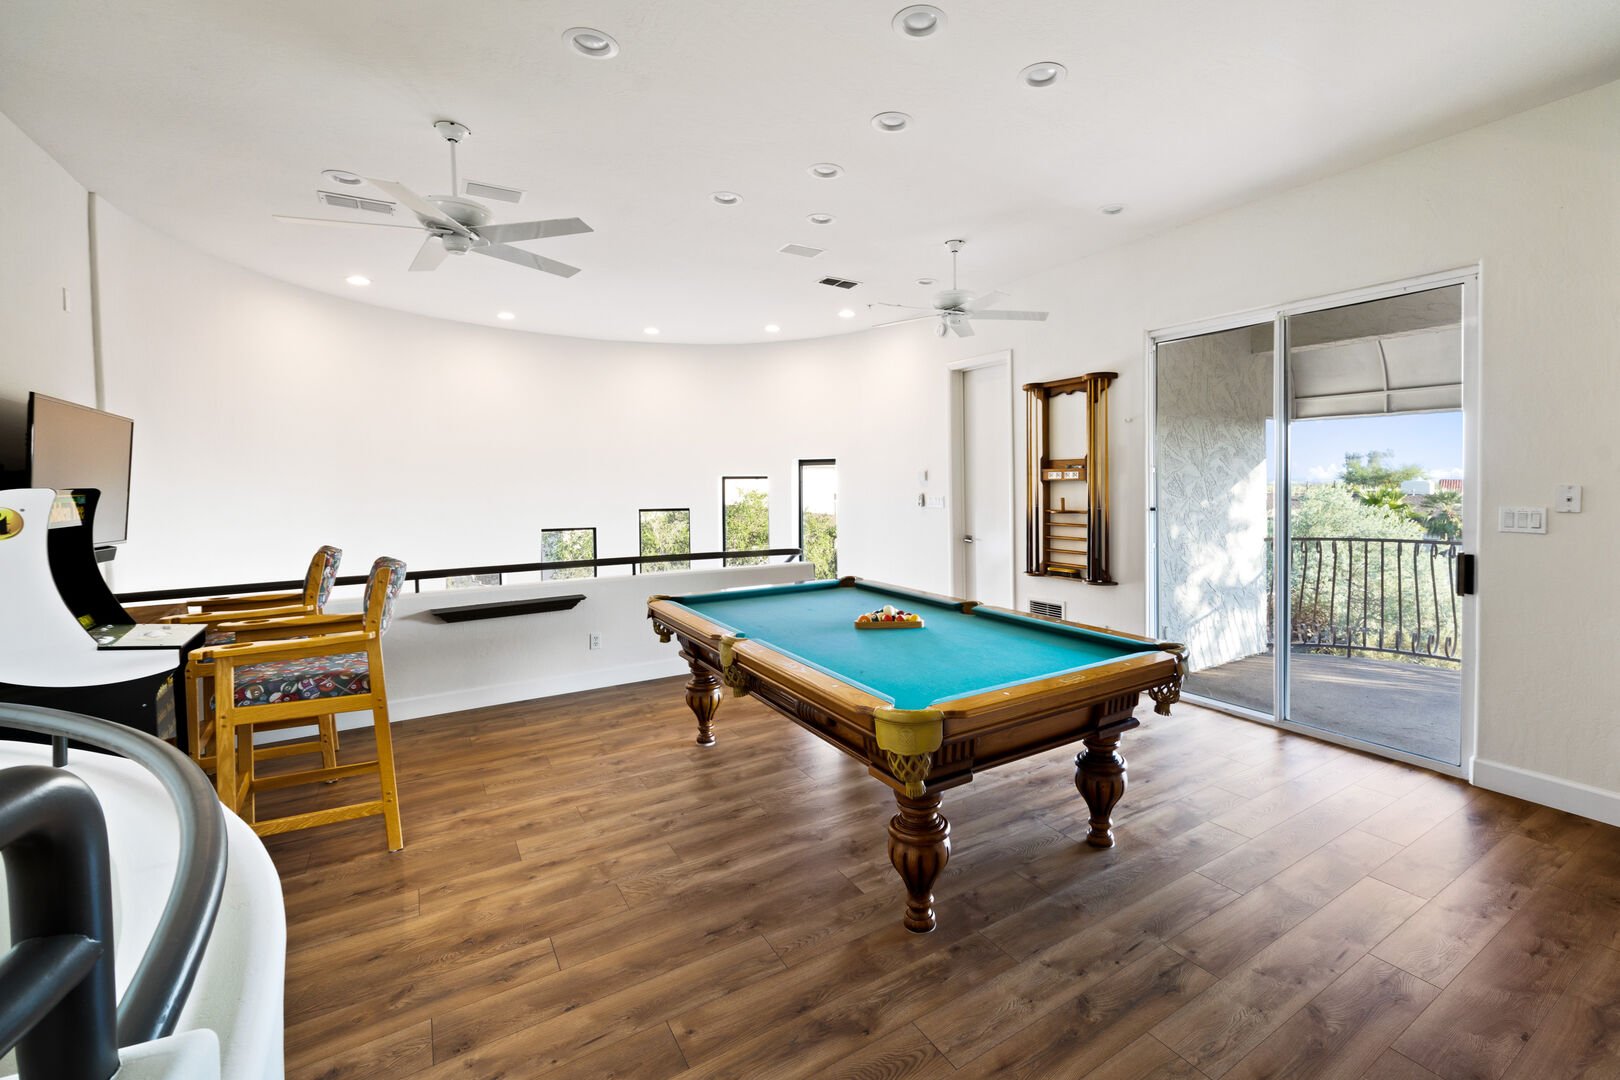 Rec Room w/ Pool Table and Games